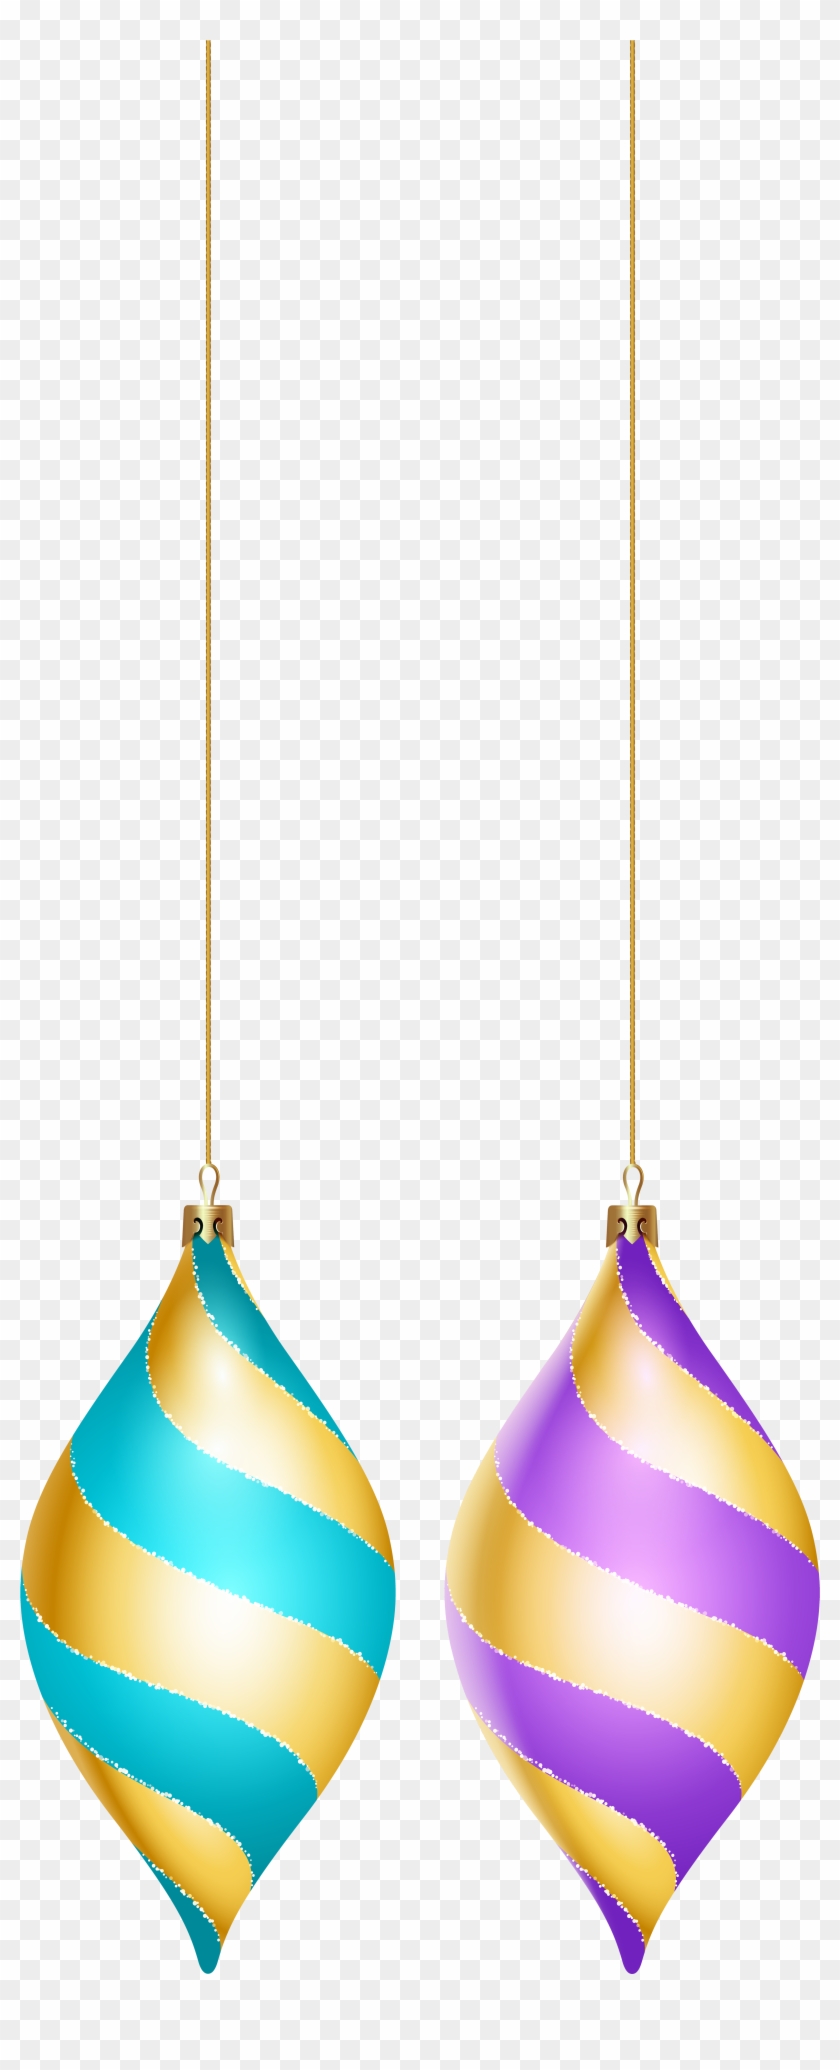 Christmas Tree Ornaments Png Clip Art Image - Earrings Transparent Png